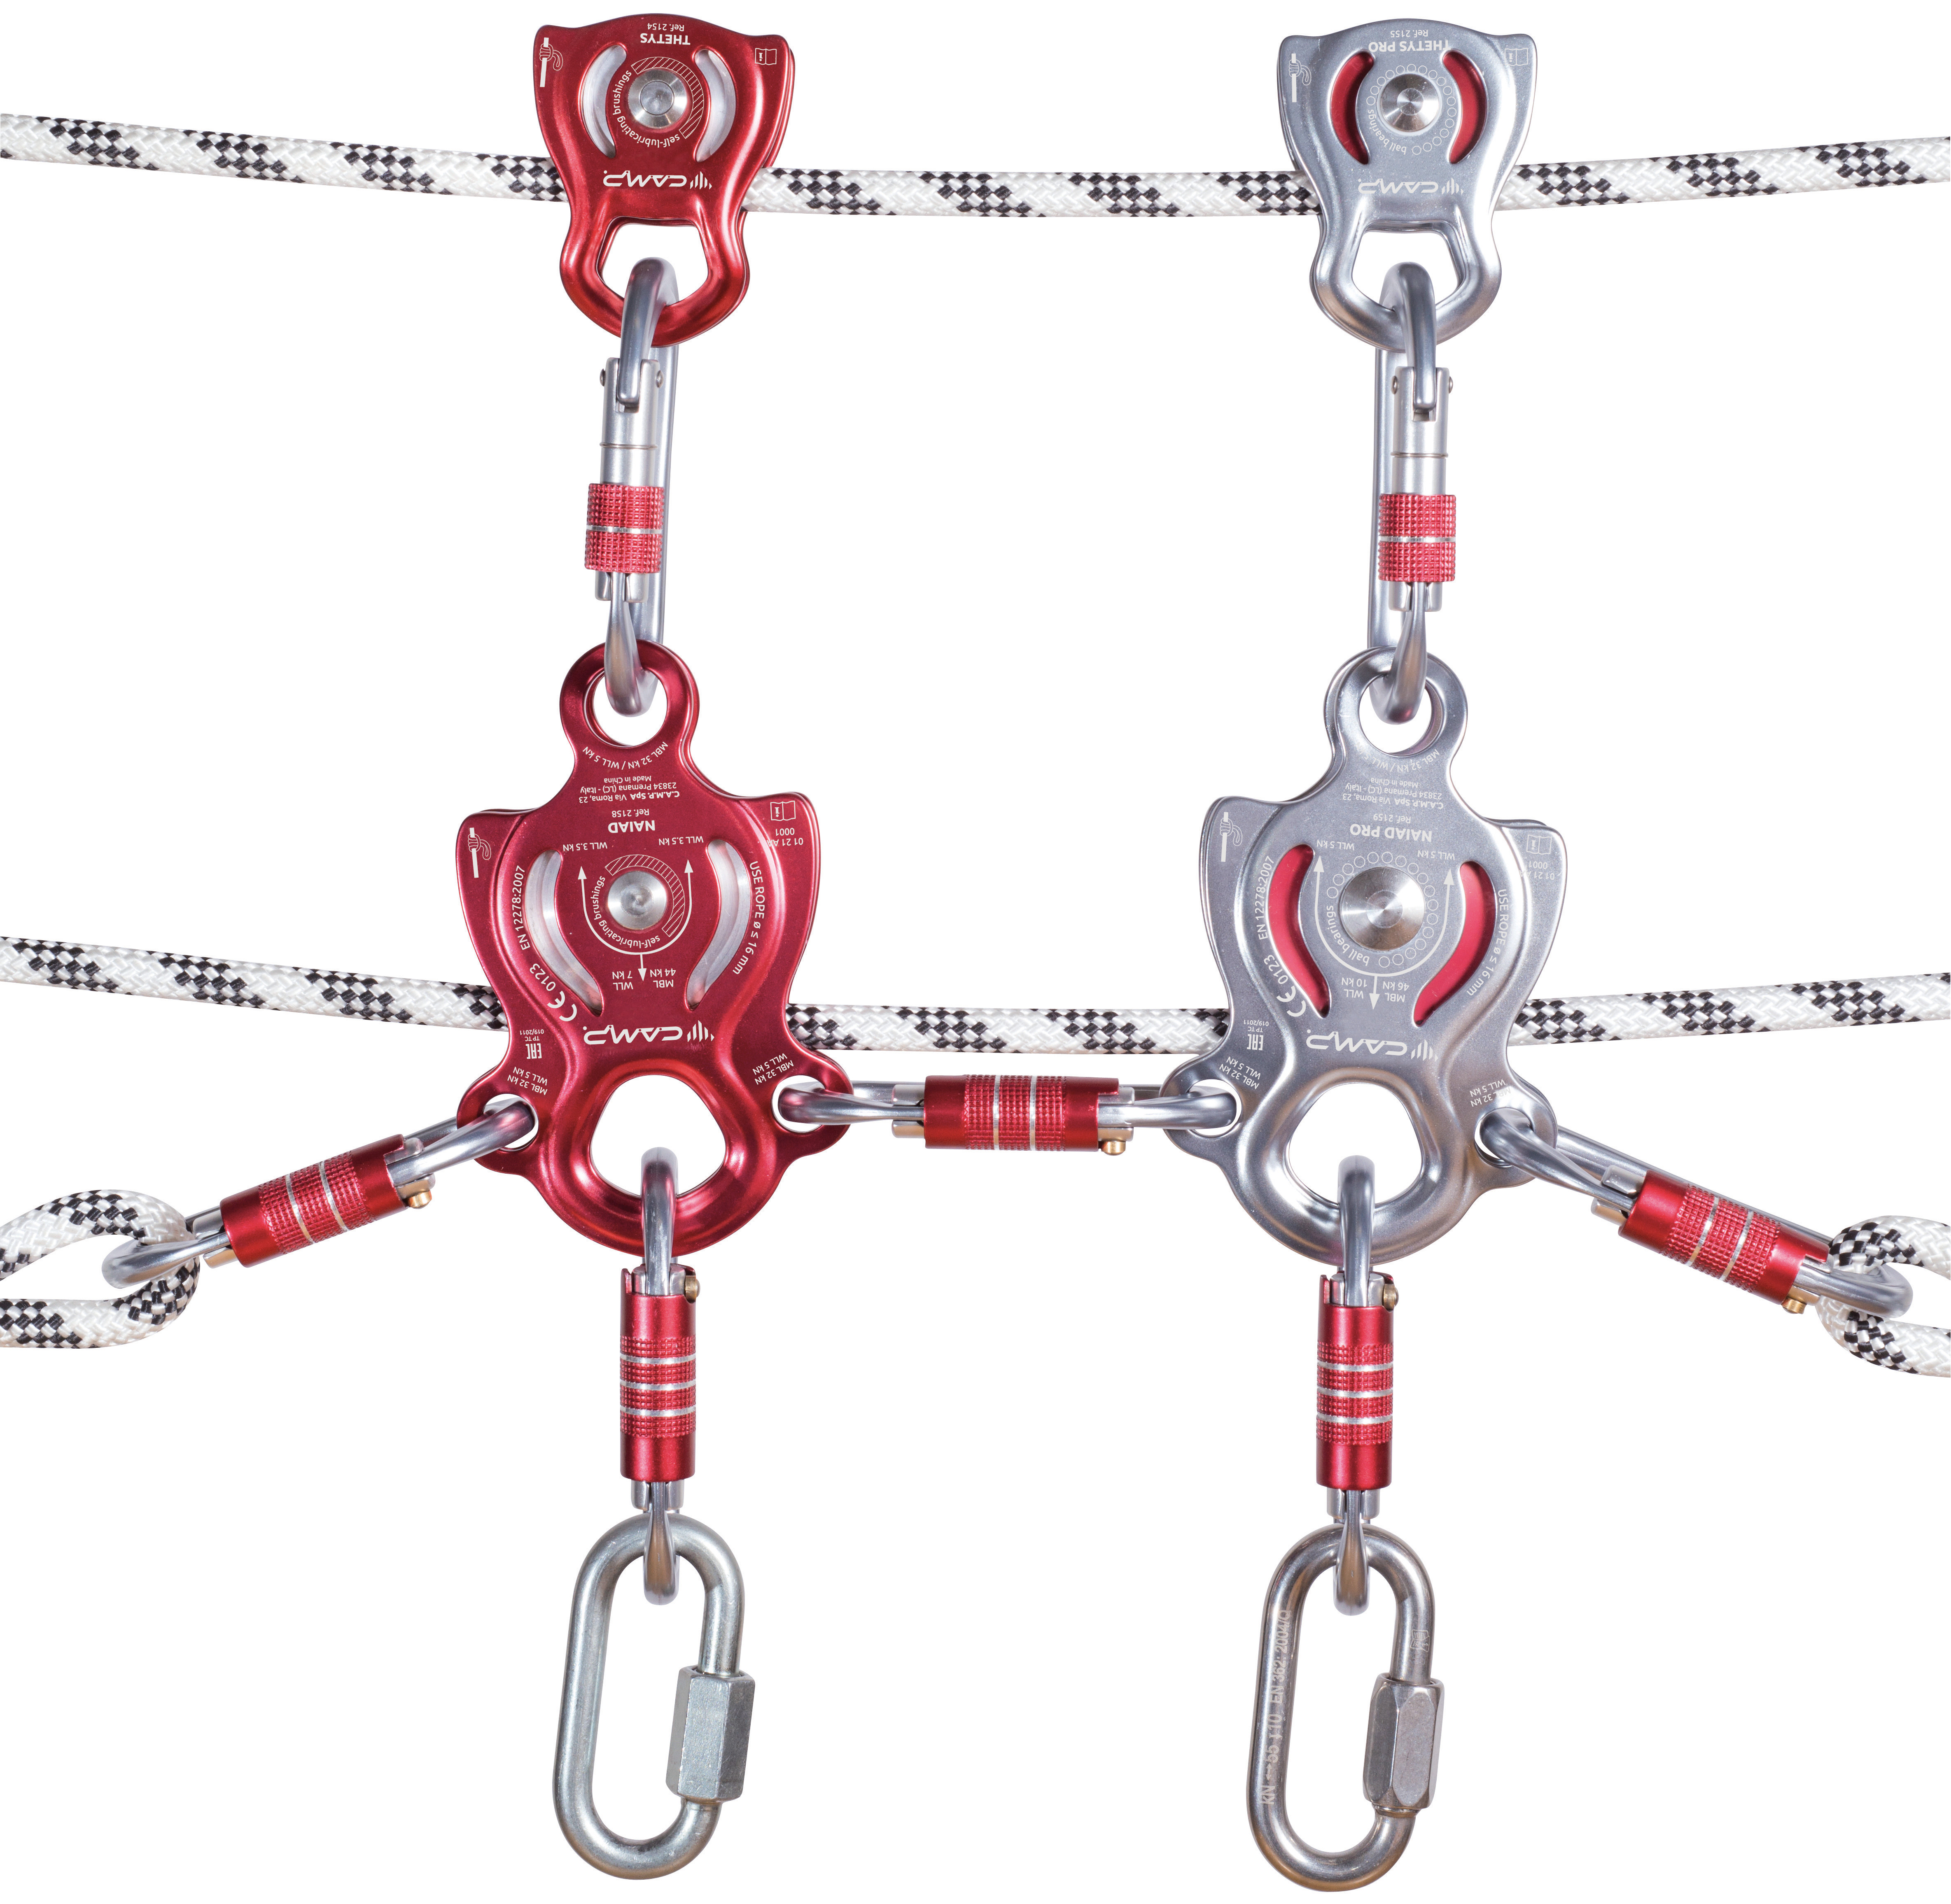 Camp USA Tethys Mobile Pulley 